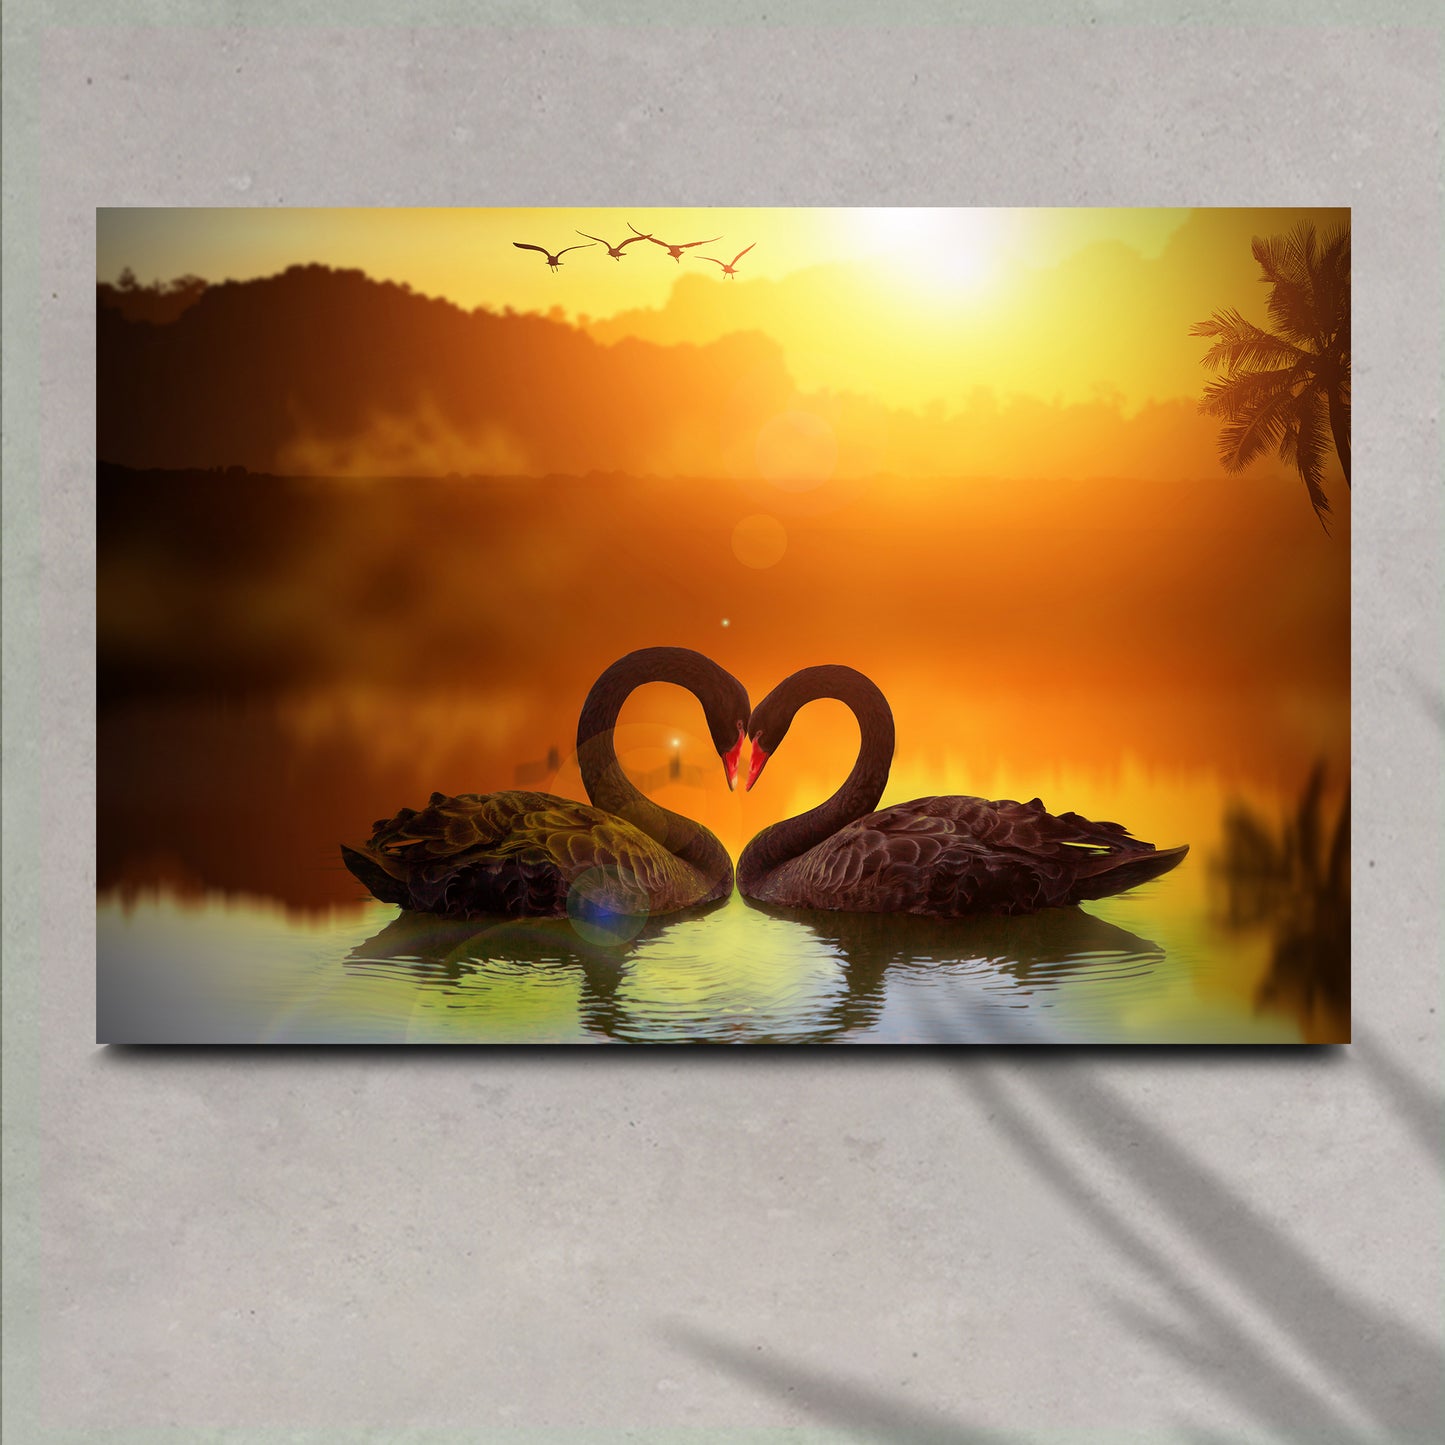 Romantic Swan at Sunset Canvas Wall Art Style 1 - Image by Tailored Canvases